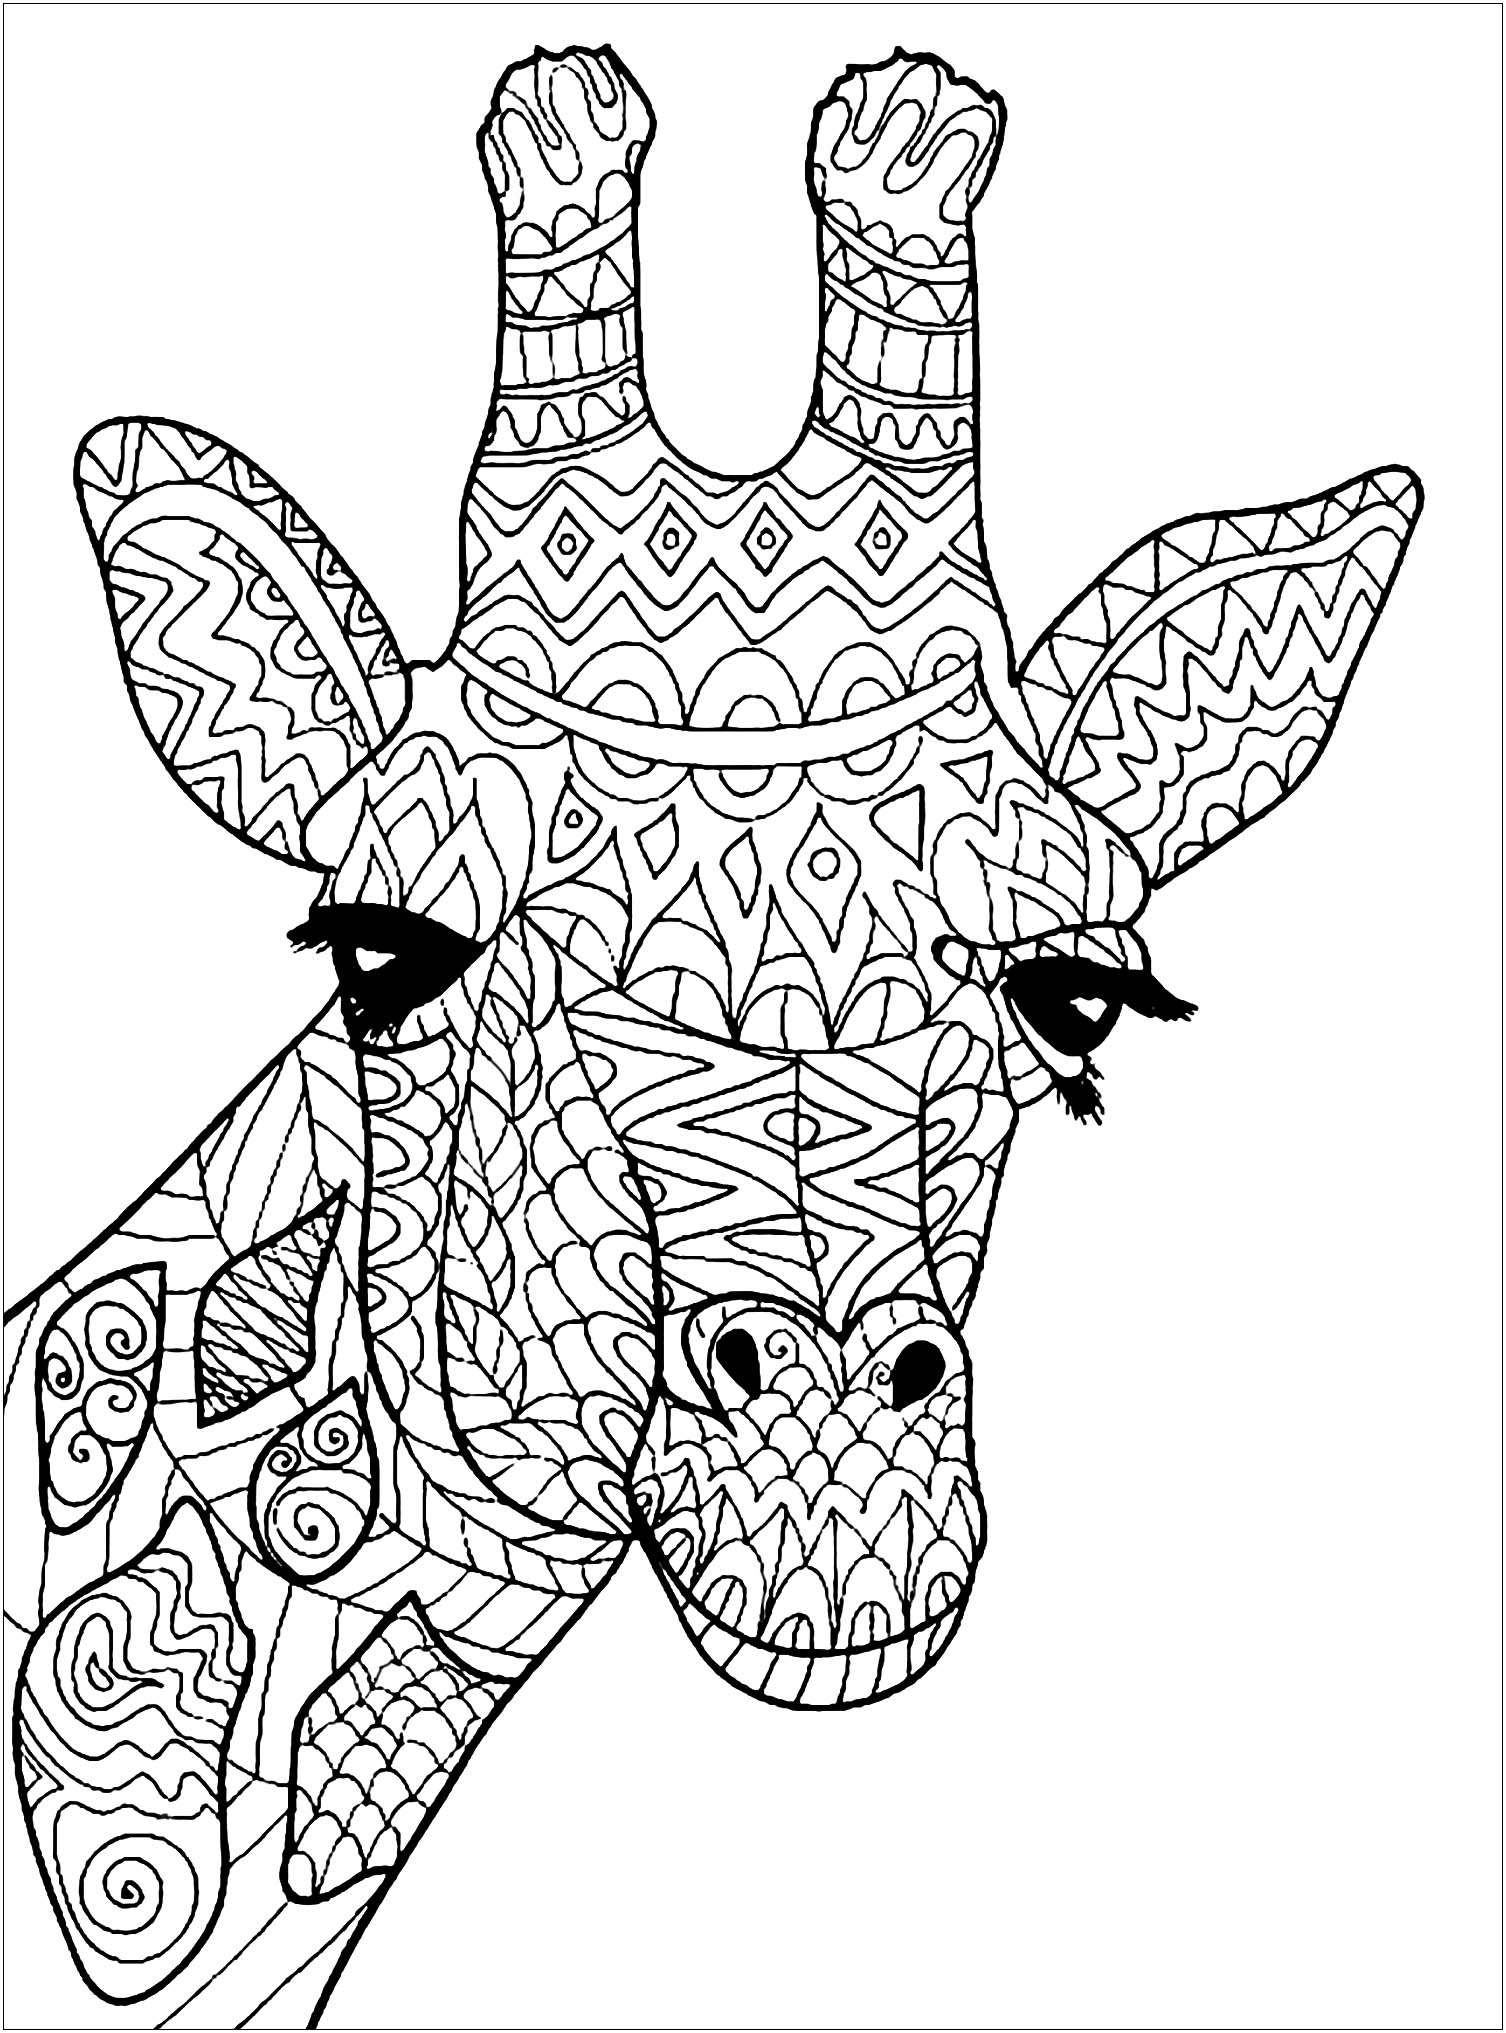 Download Giraffe Head Giraffes Adult Coloring Pages